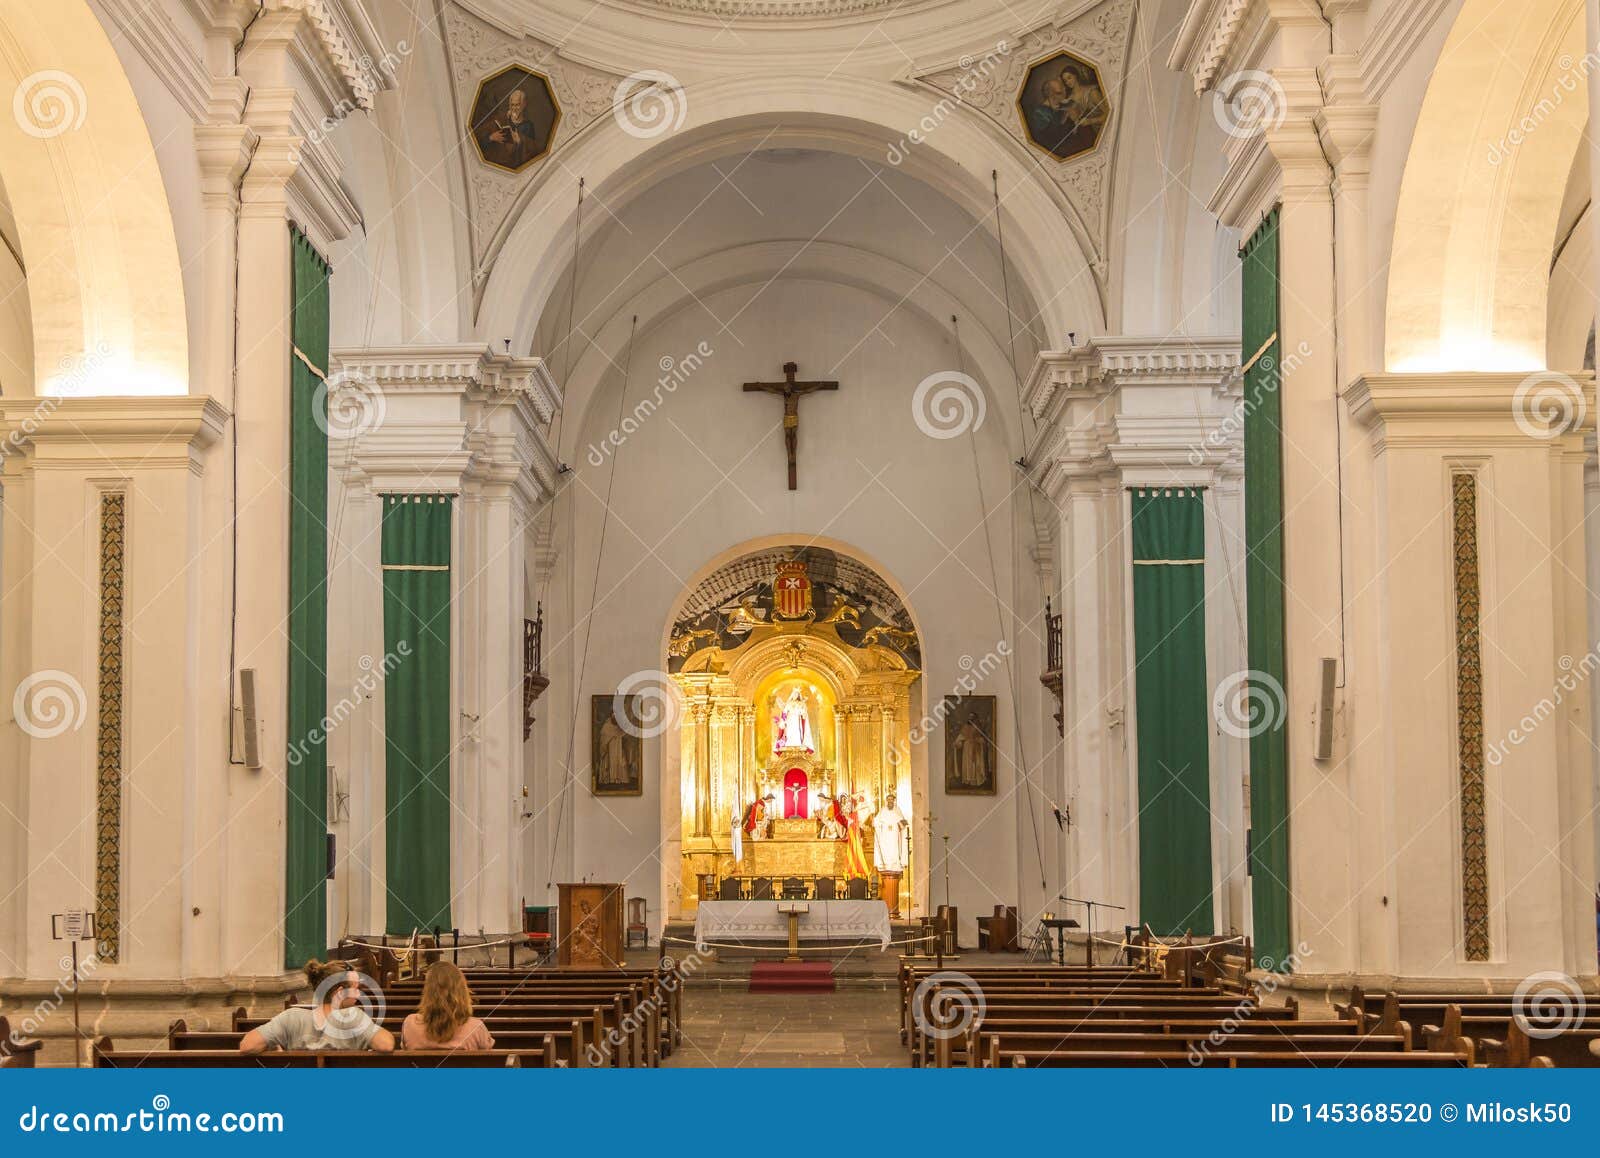 View at the Interior and Choir of La Merced Church in Antigua Guatemala  Editorial Image - Image of guatemala, merced: 145368520